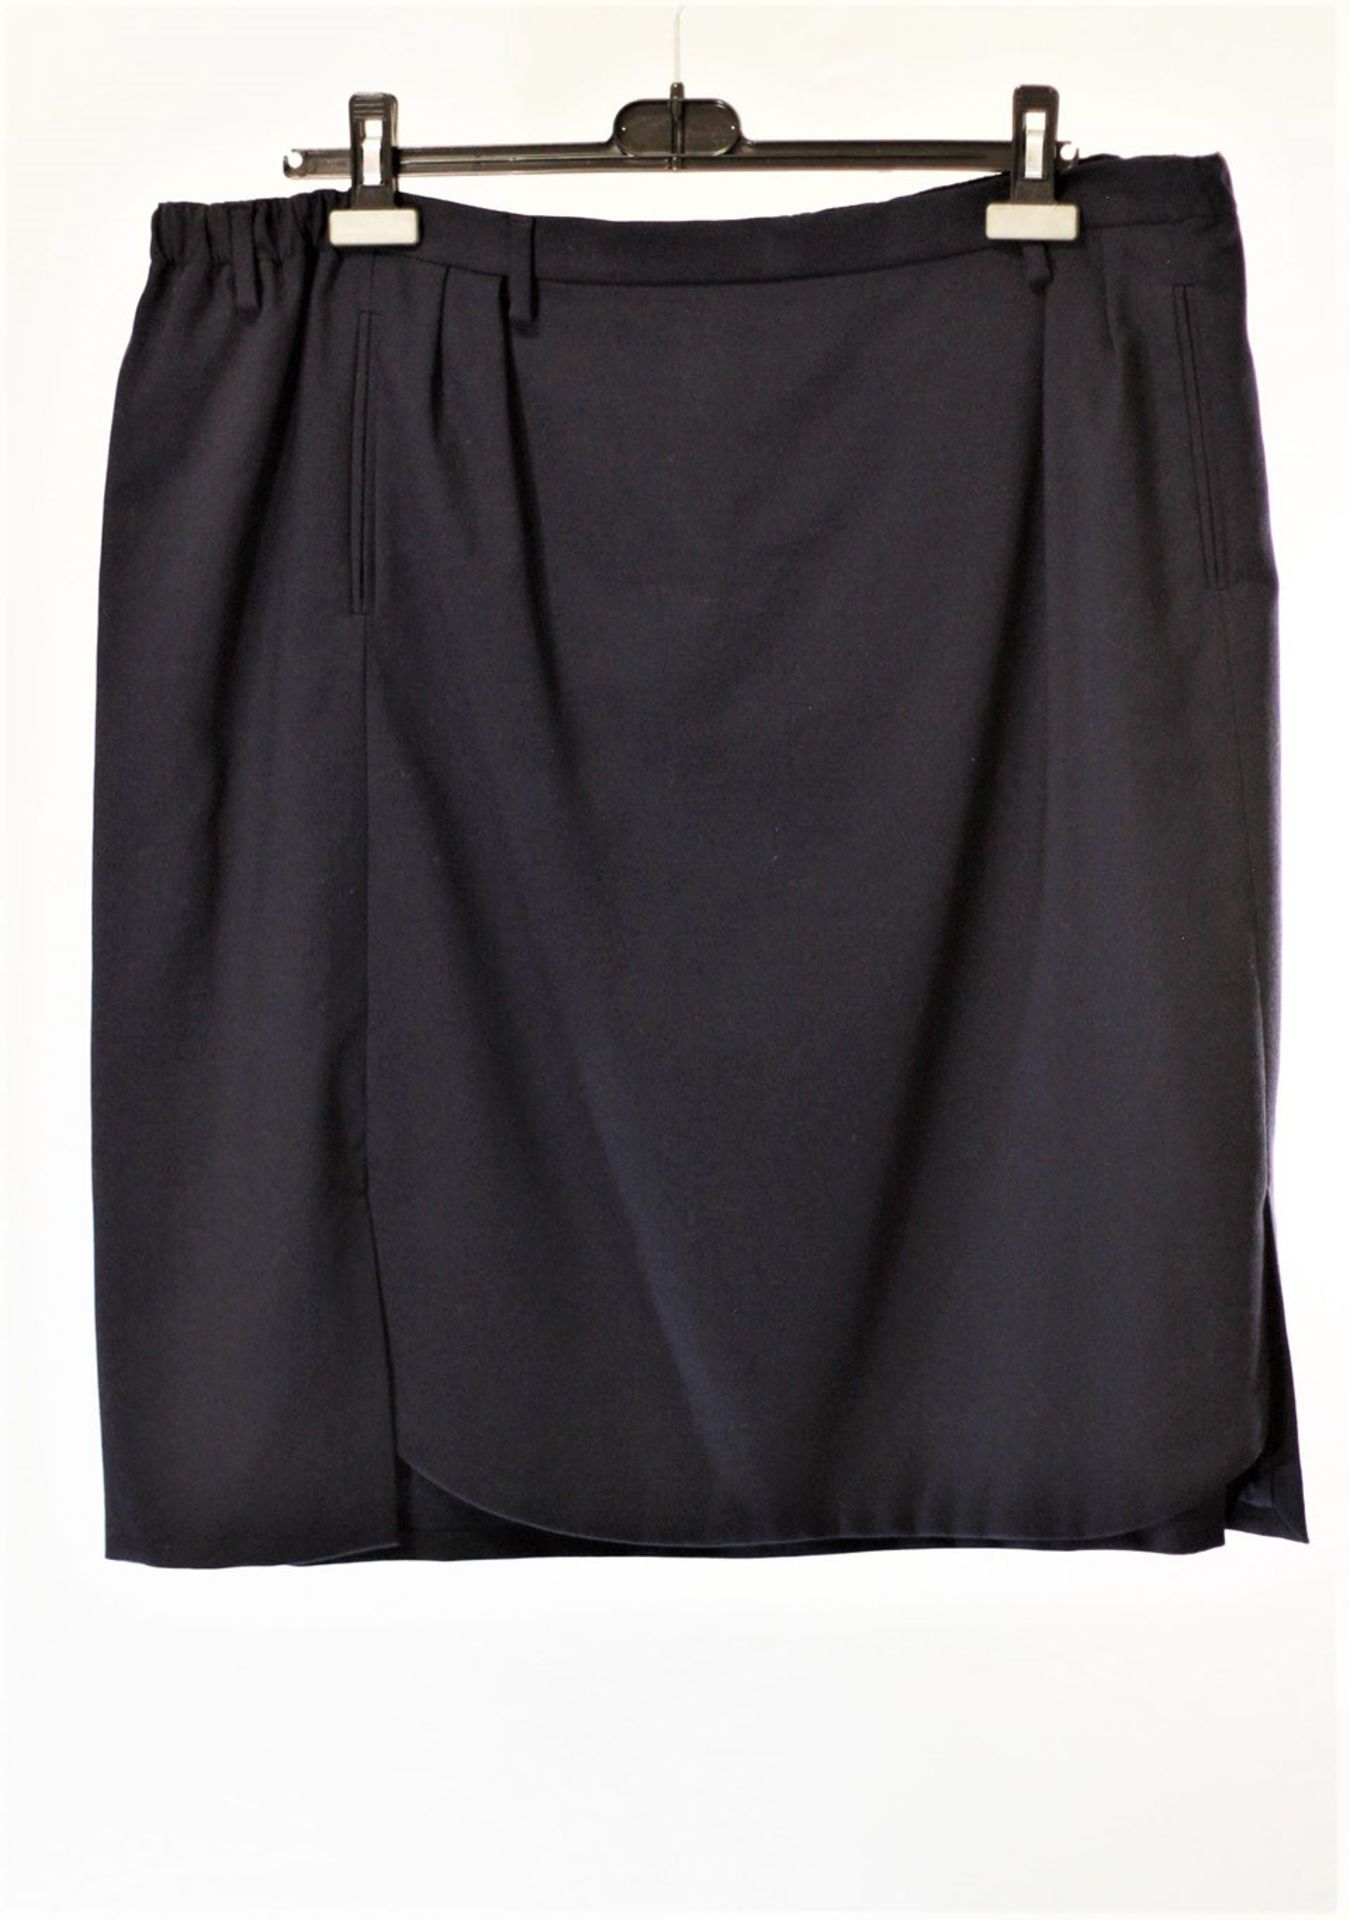 1 x Agnona Navy Skirt - Size: 24 - Material: 97% Cotton, 2% Nylon, 1% Elastane - From a High End - Image 4 of 5